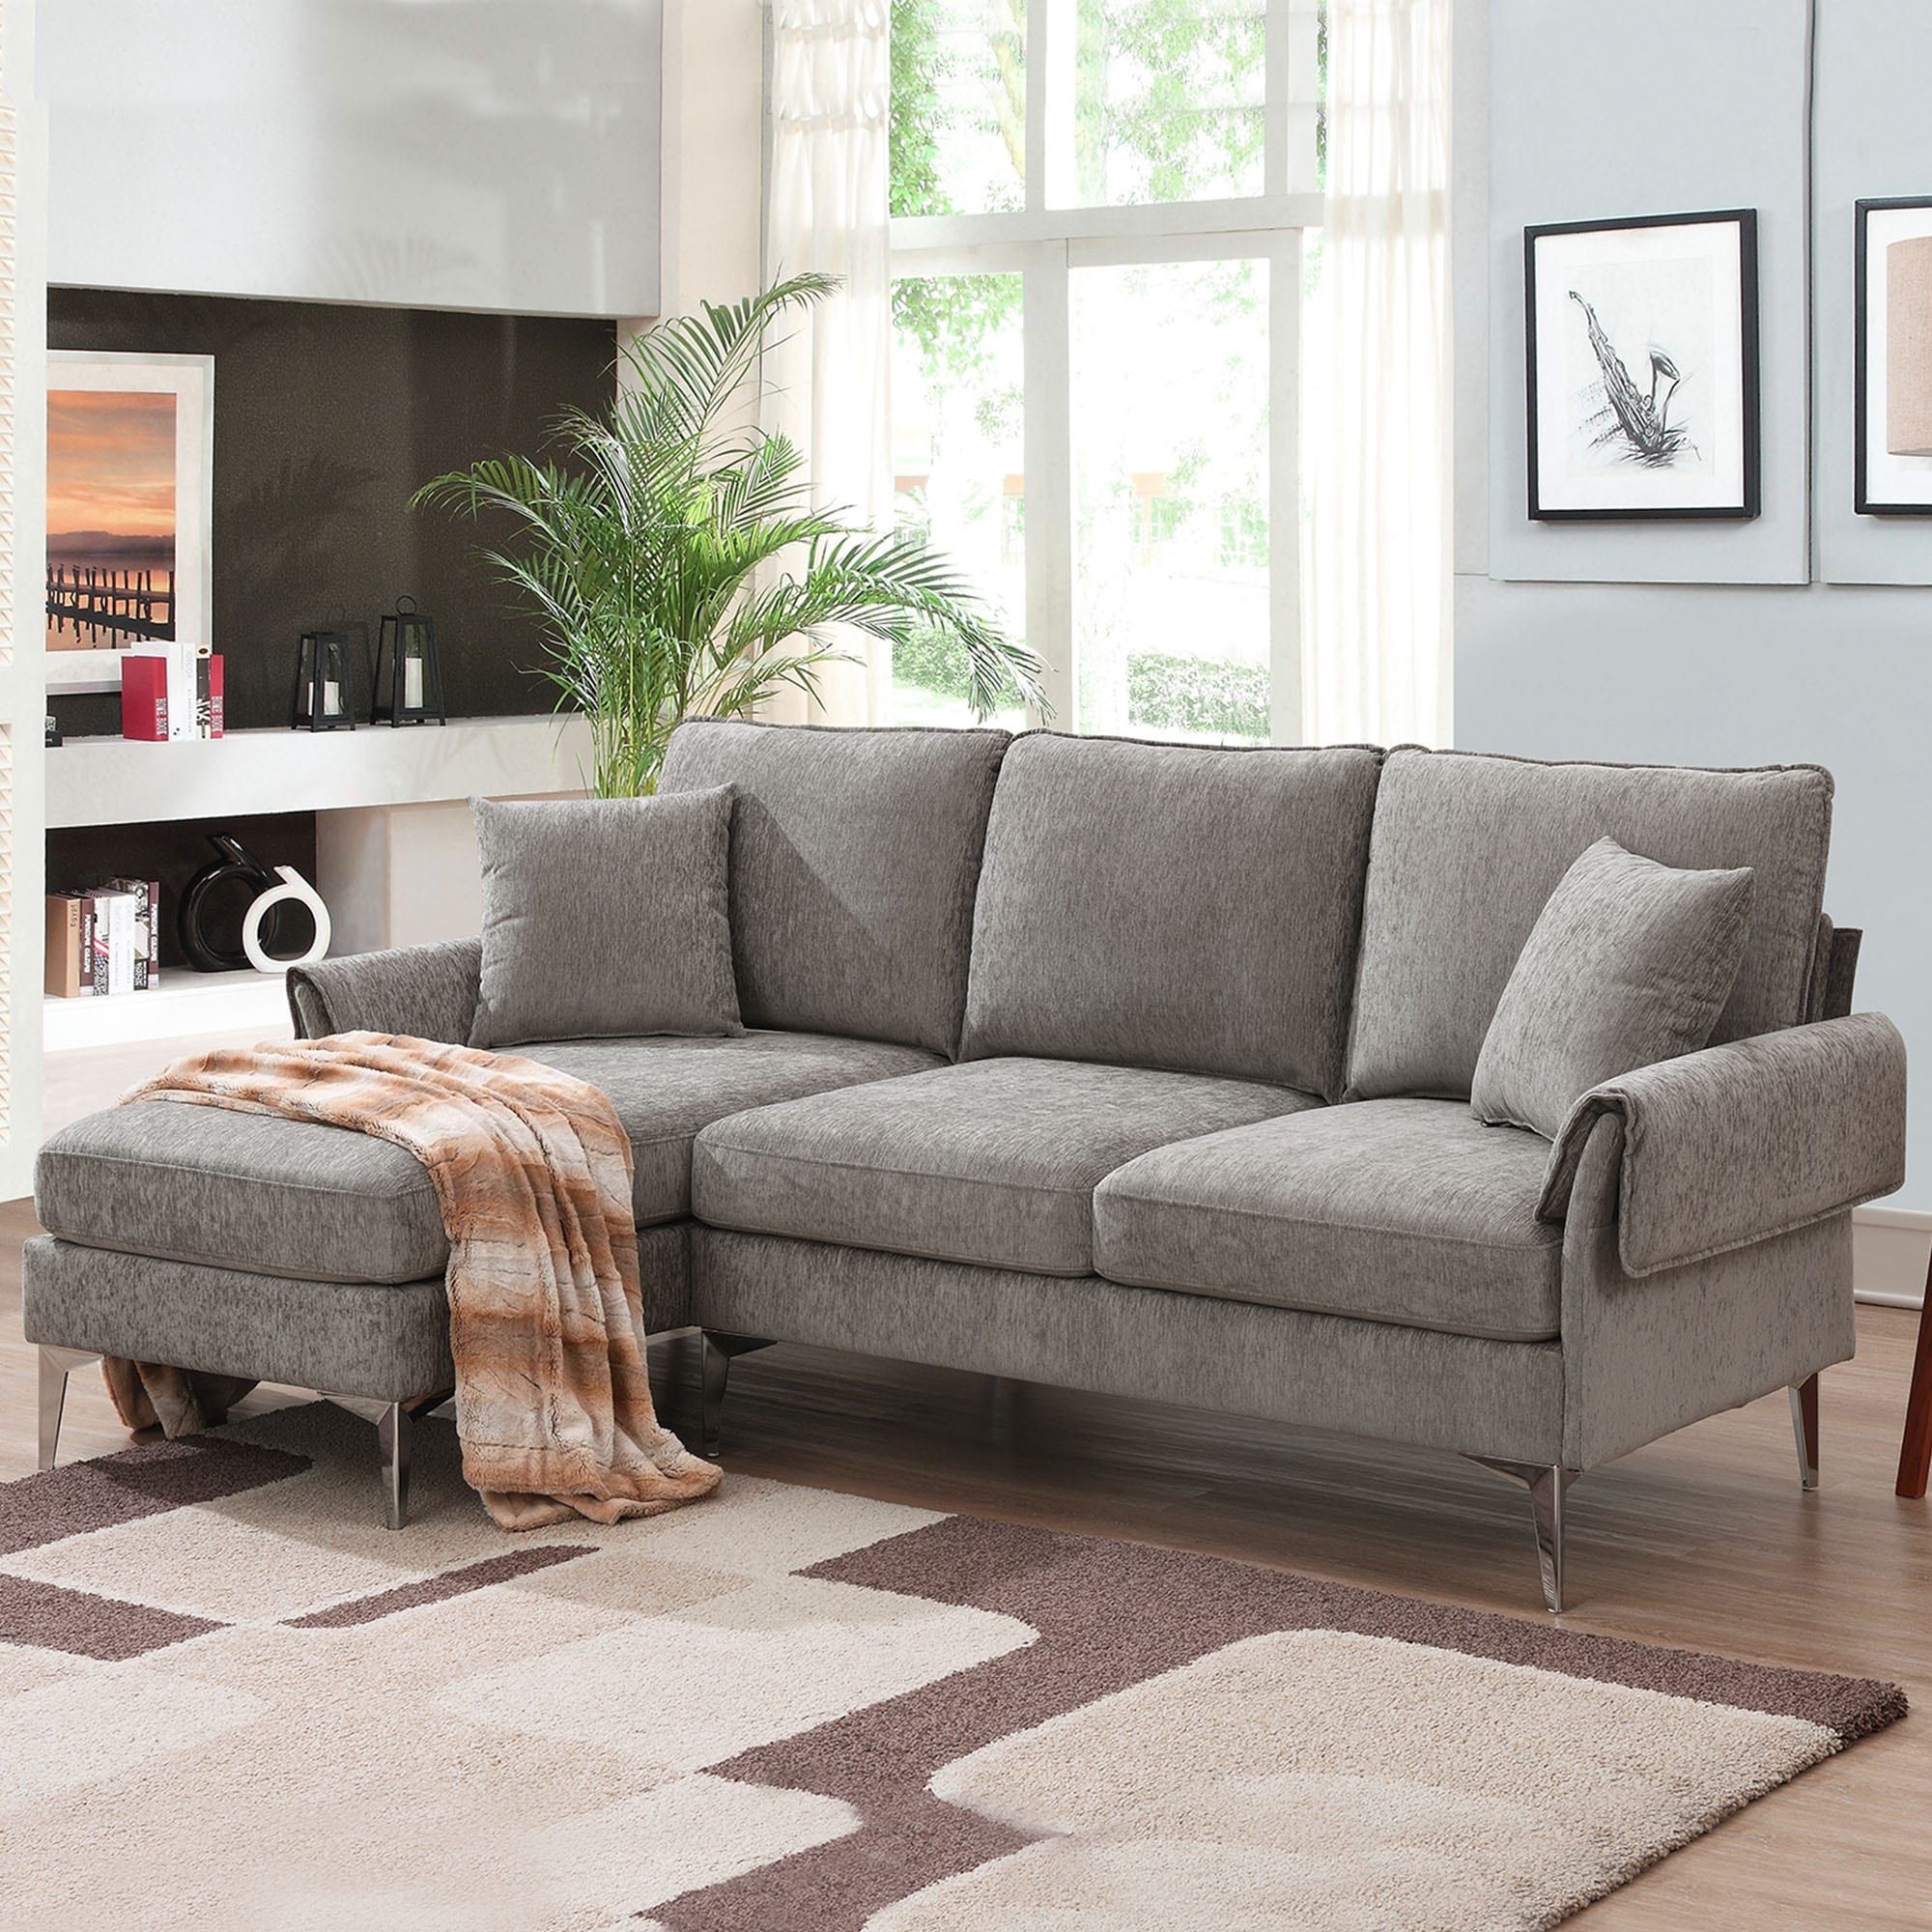 Modern Convertible Sectional Sofa, L Shaped Couch W/Reversible Chaise And 2  Pillows – Bed Bath & Beyond – 37256829 For L Shape Couches With Reversible Chaises (View 6 of 15)